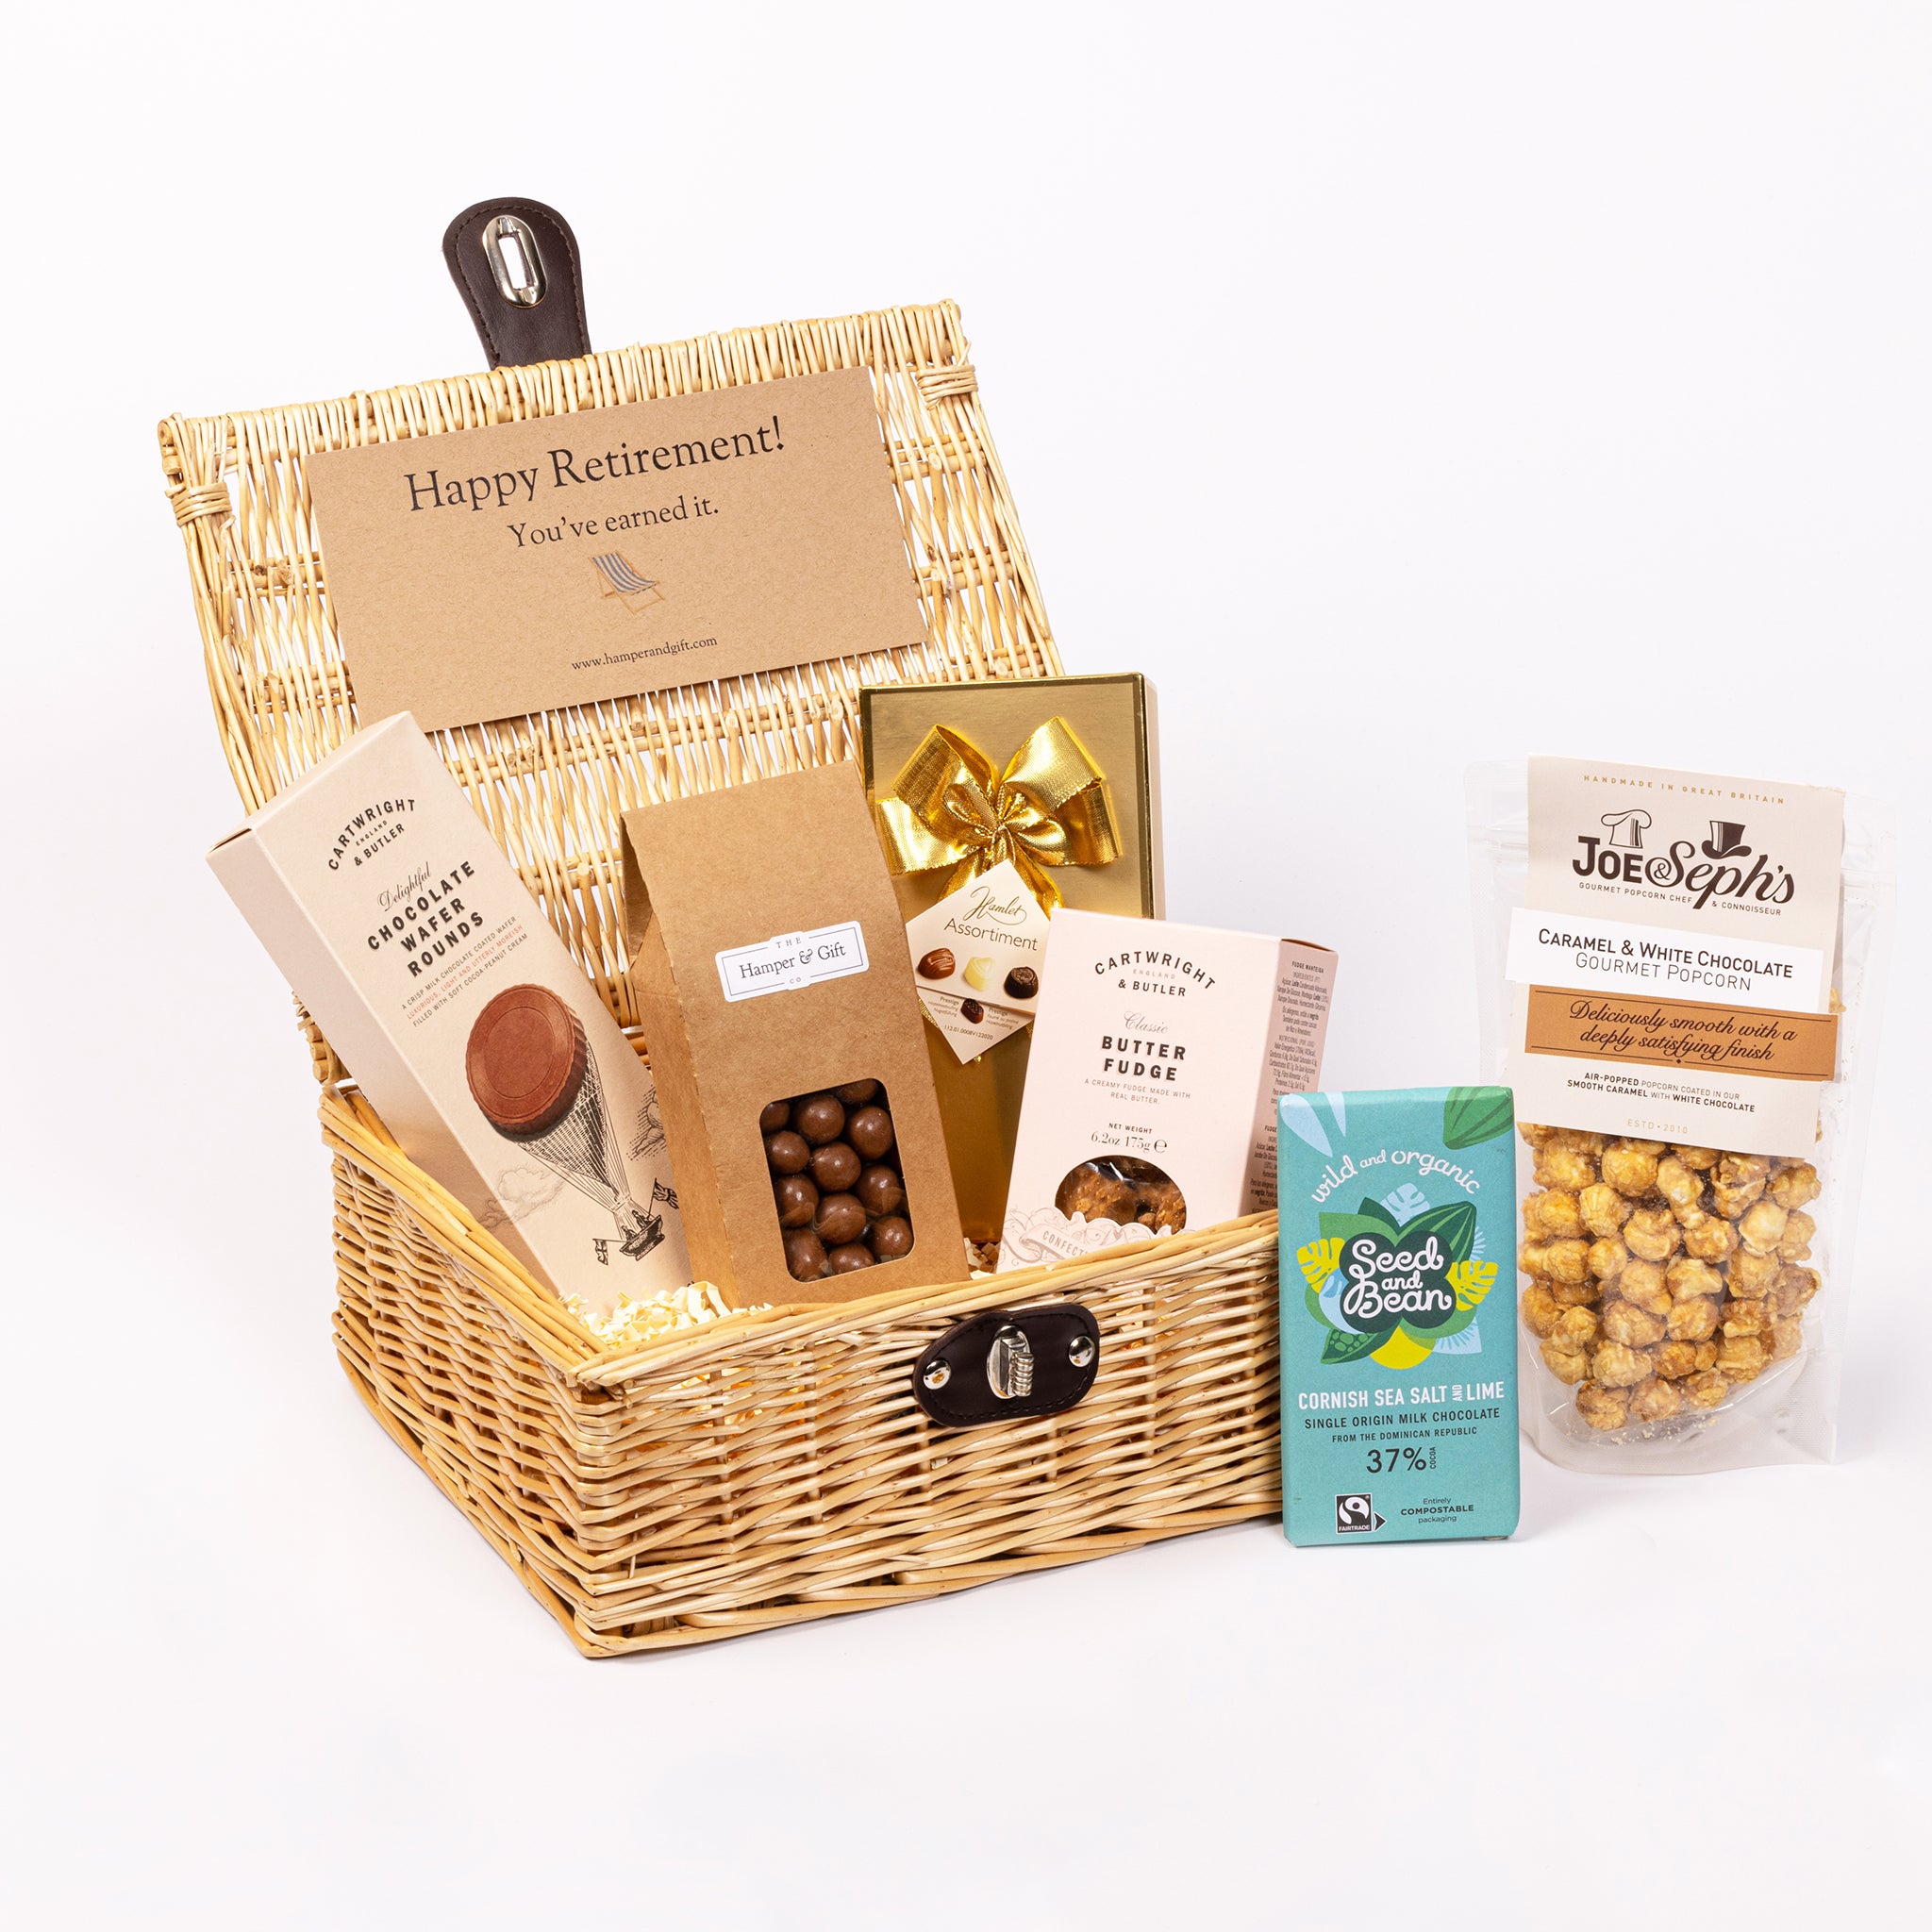 Buy our thank you cheerful treats gift basket at broadwaybasketeers.com